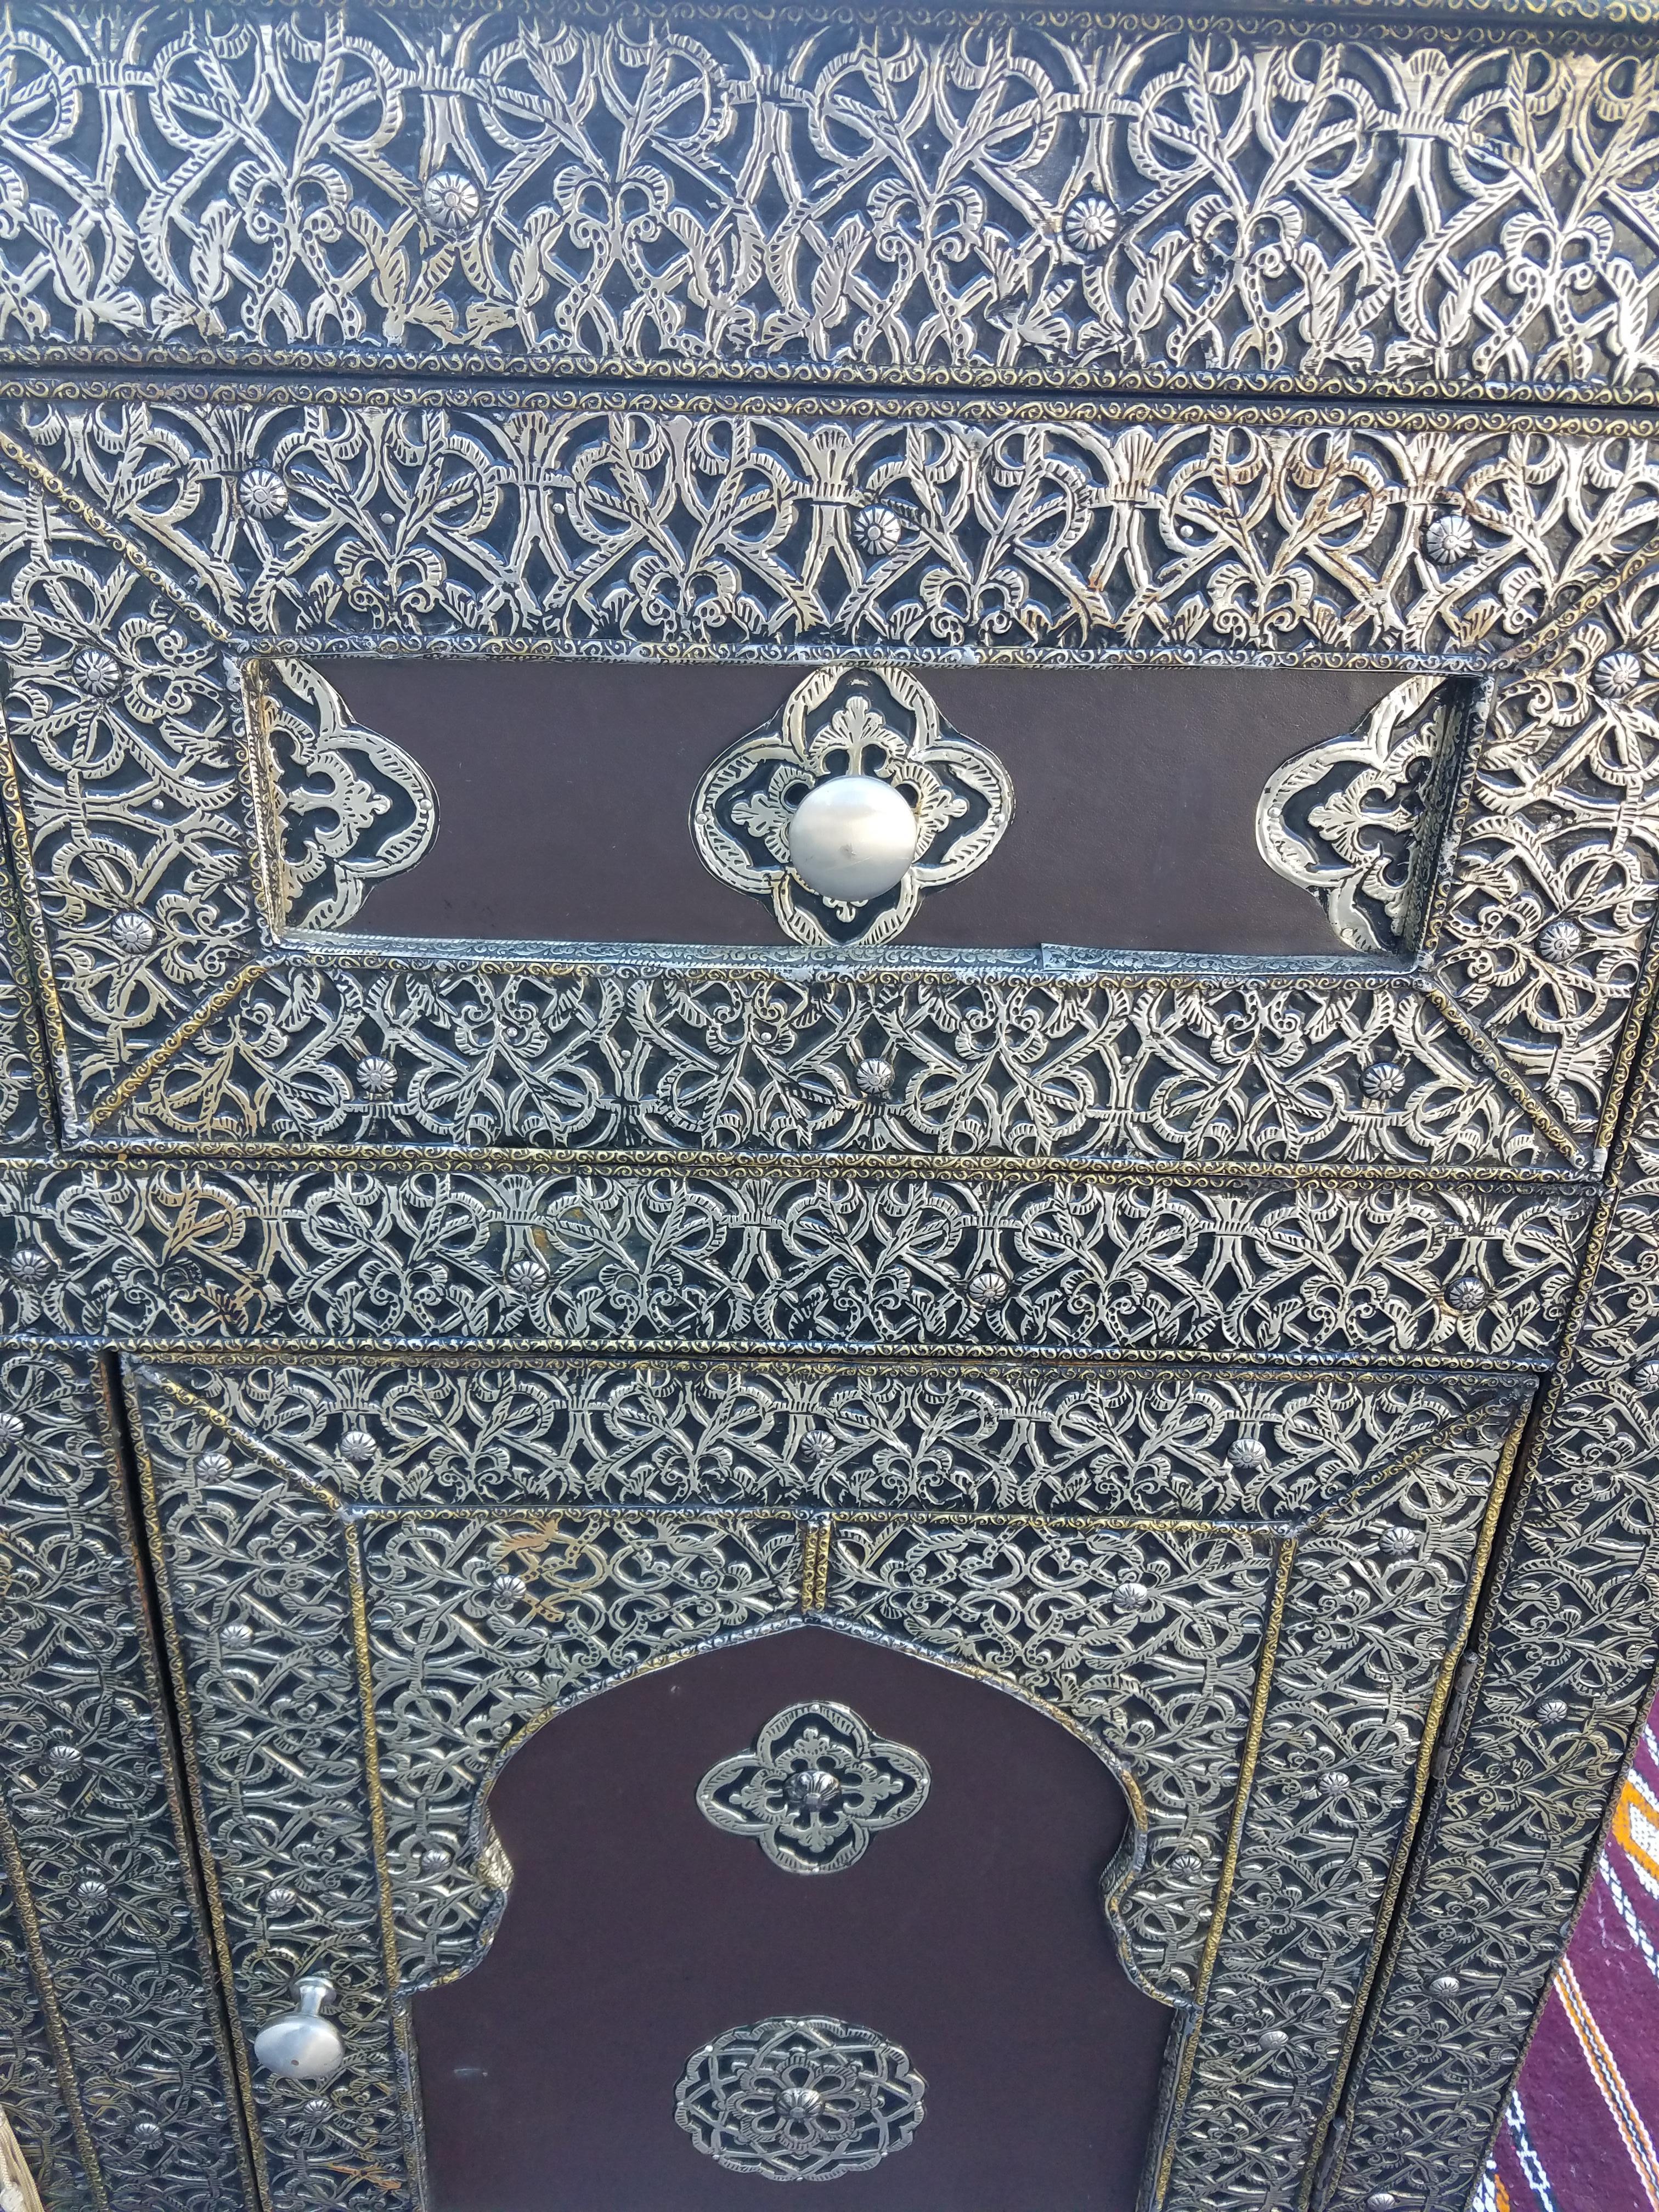 Aged all metal inlaid handmade Moroccan wooden cabinet measuring approximately 35” in height, 39” in width, and 16” in depth, and featuring one inside shelf with double doors and two easy to open drawers above. Plenty of storage. Lots of details